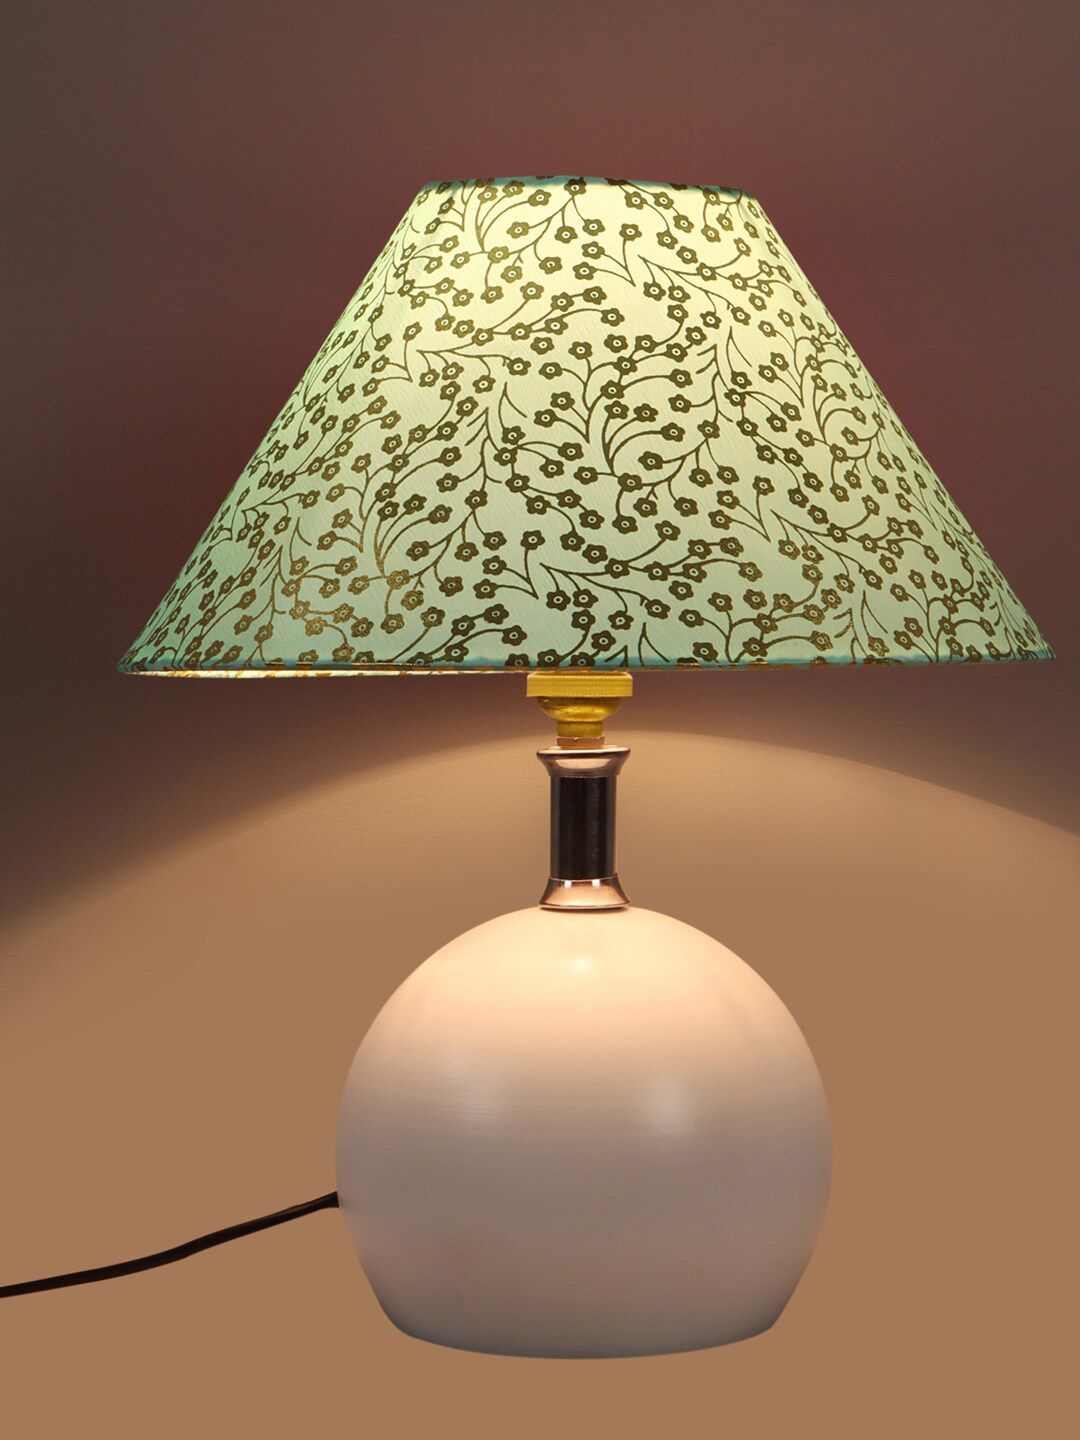 Foziq White & Green Printed Table Lamps Price in India